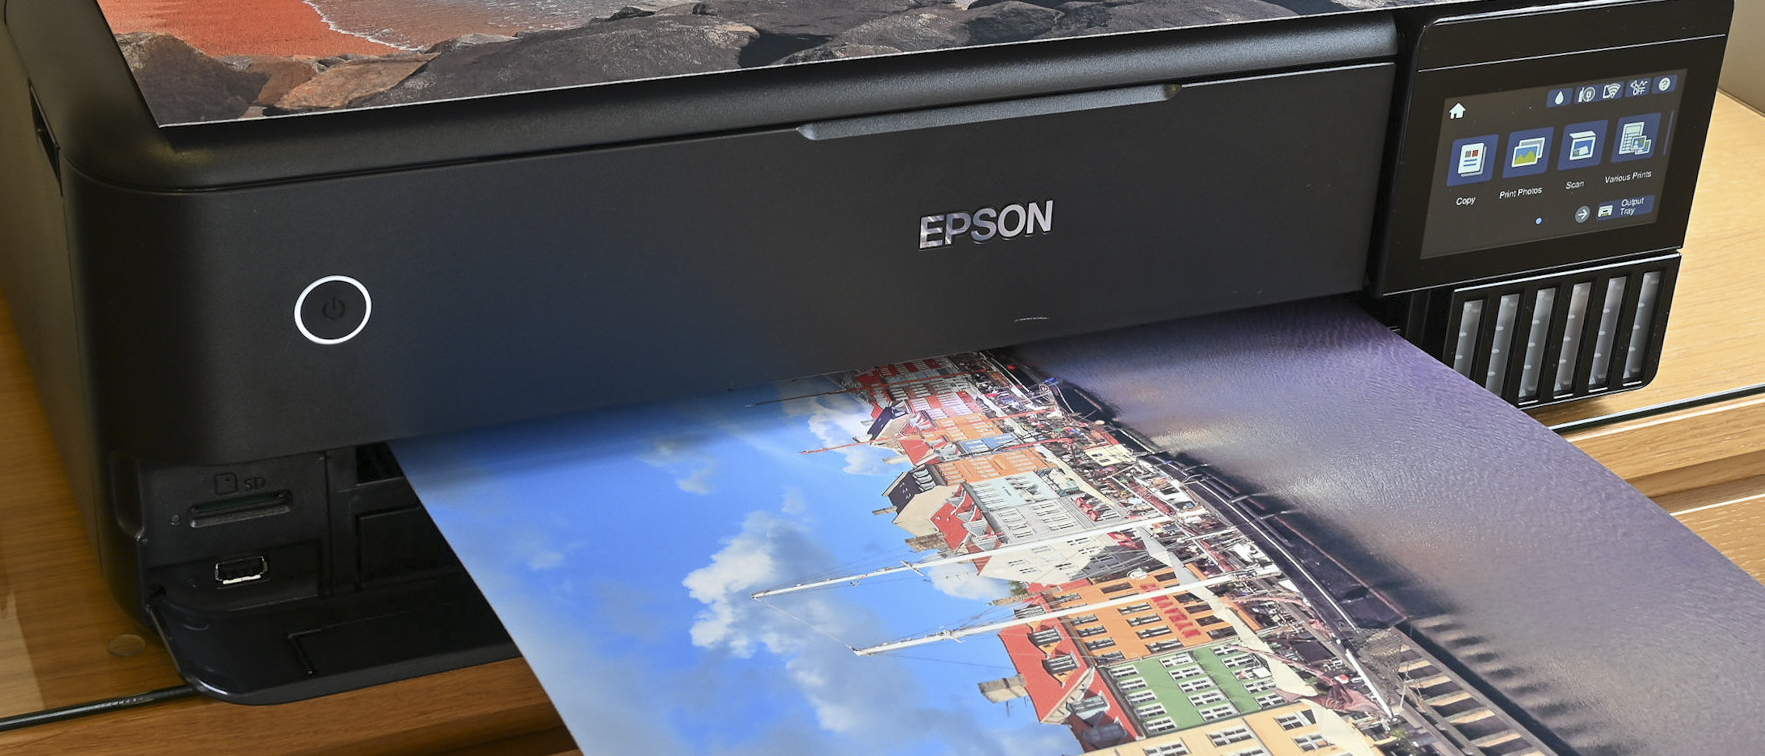 Epson EcoTank Photo ET-8500 vs Epson EcoTank Photo ET-8550: What is the  difference?